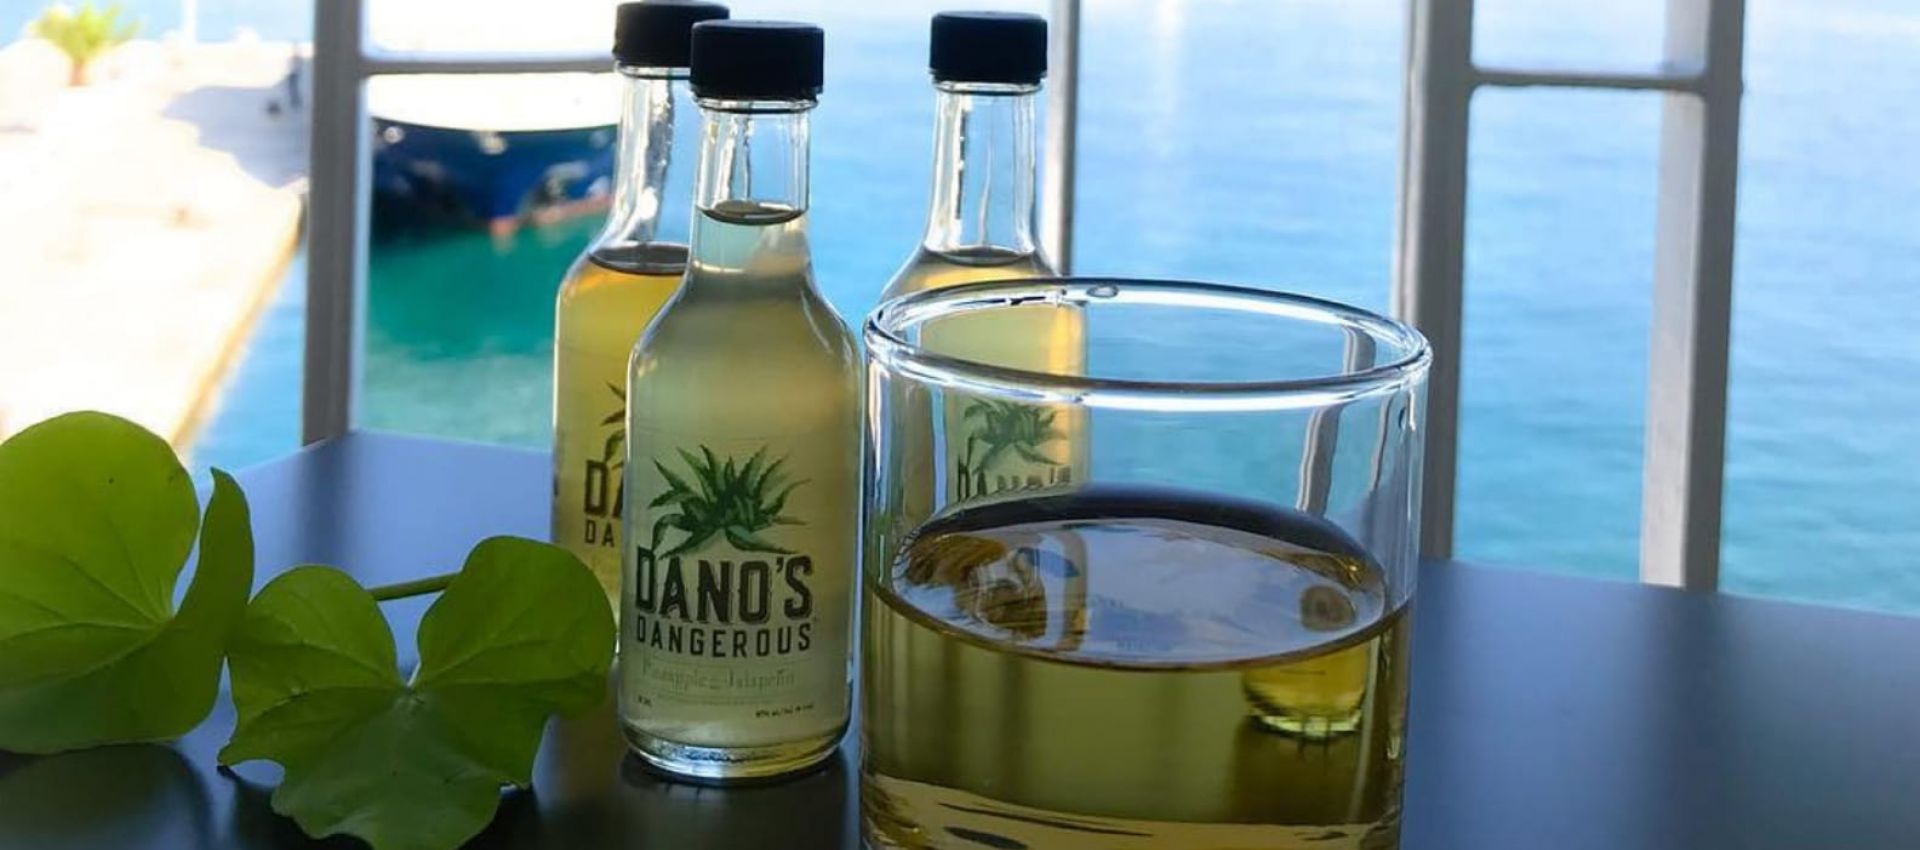 Photo for: Dano's Dangerous Tequila – Featuring Fruit Infused Tequila